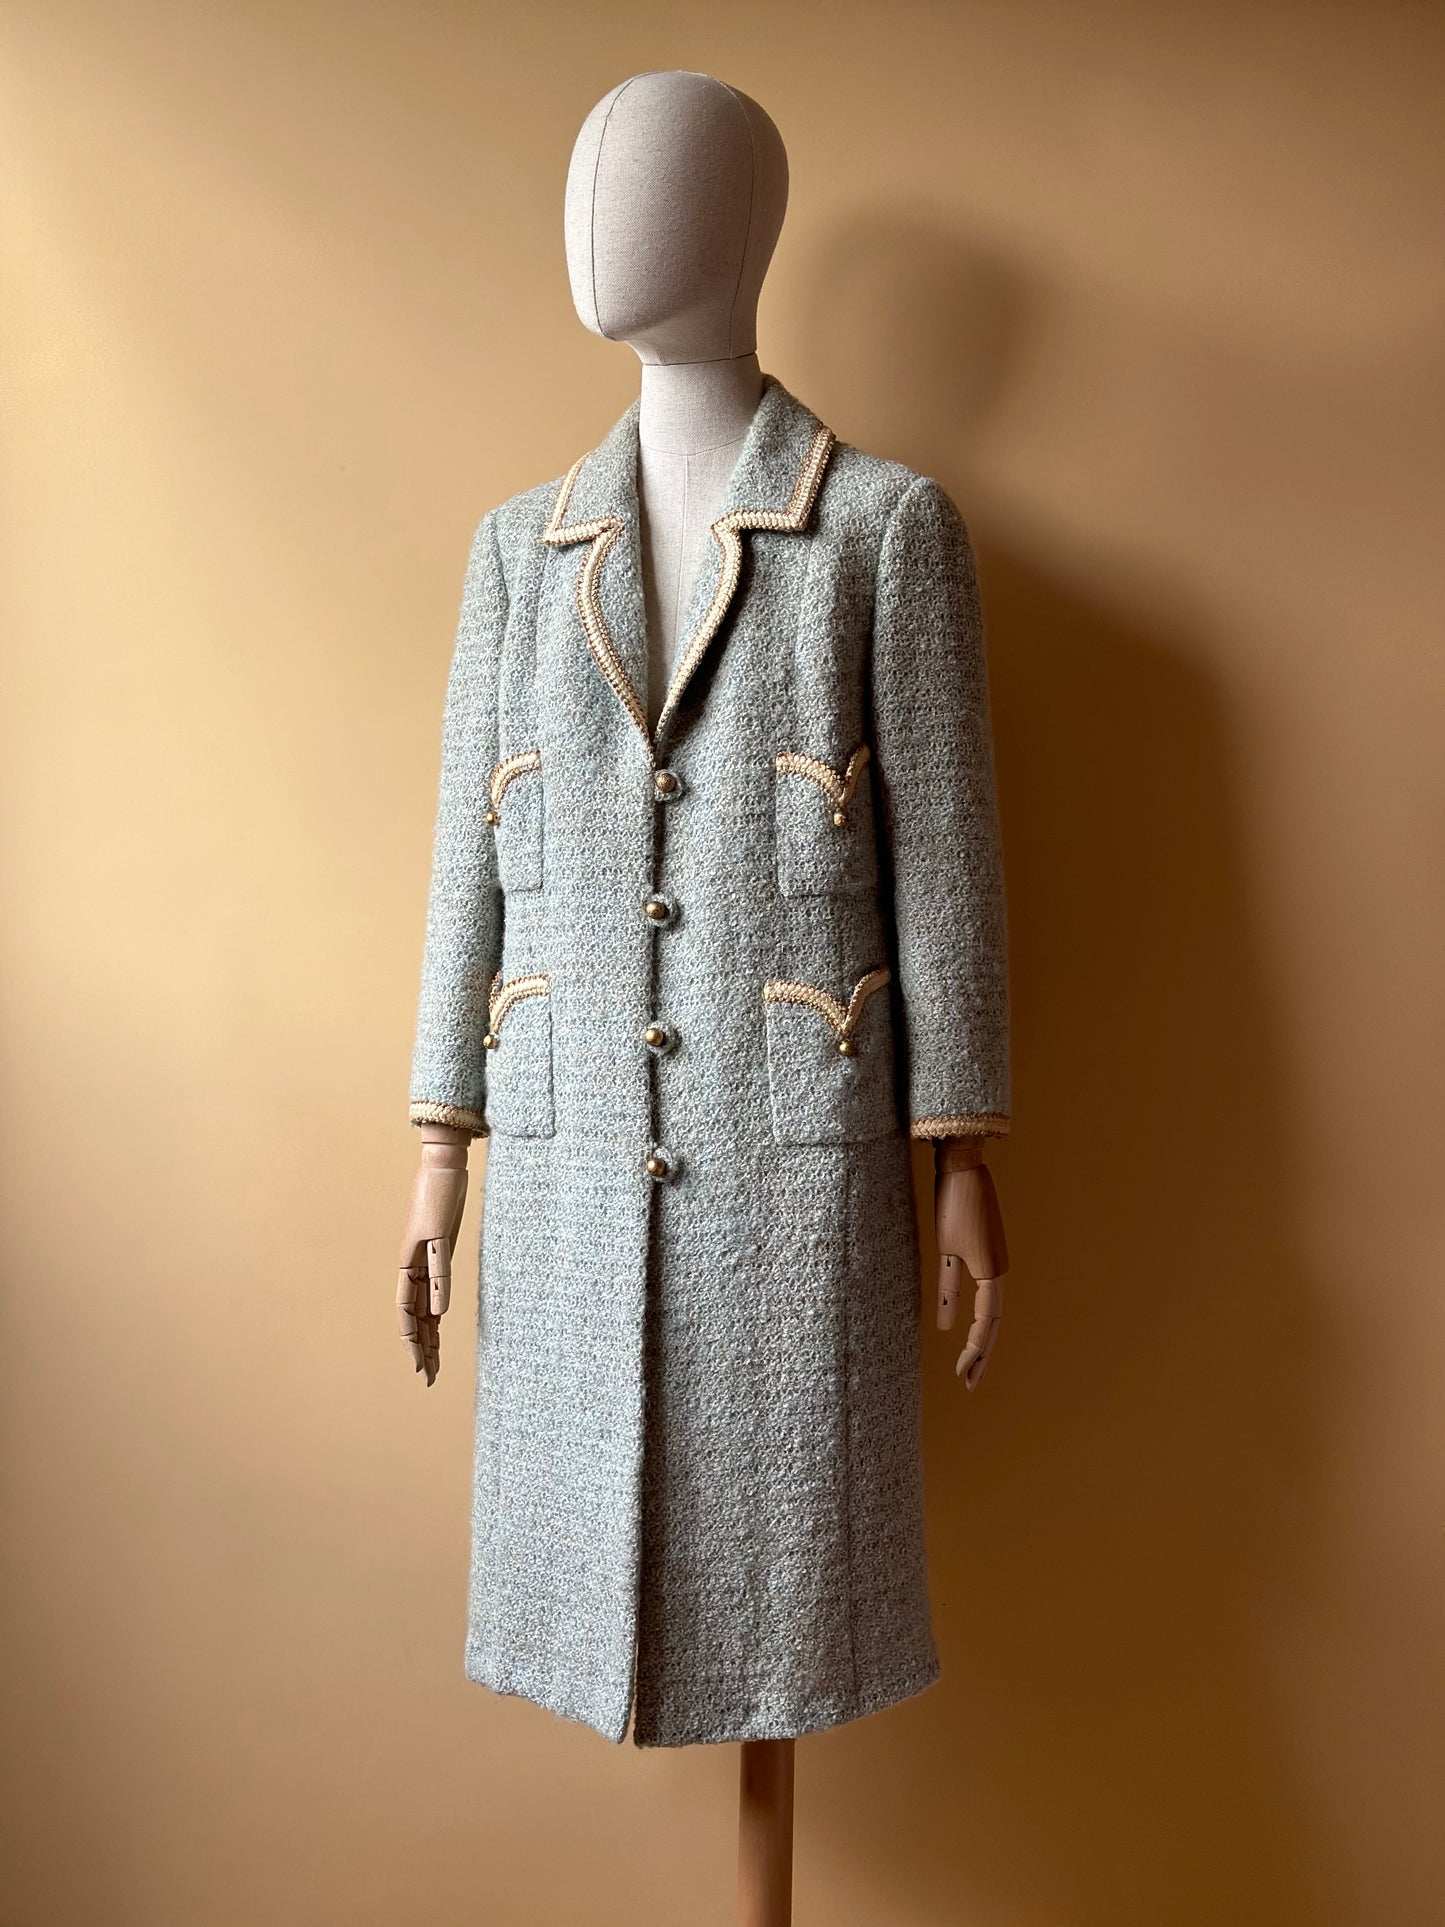 Vintage Tailored French Coat